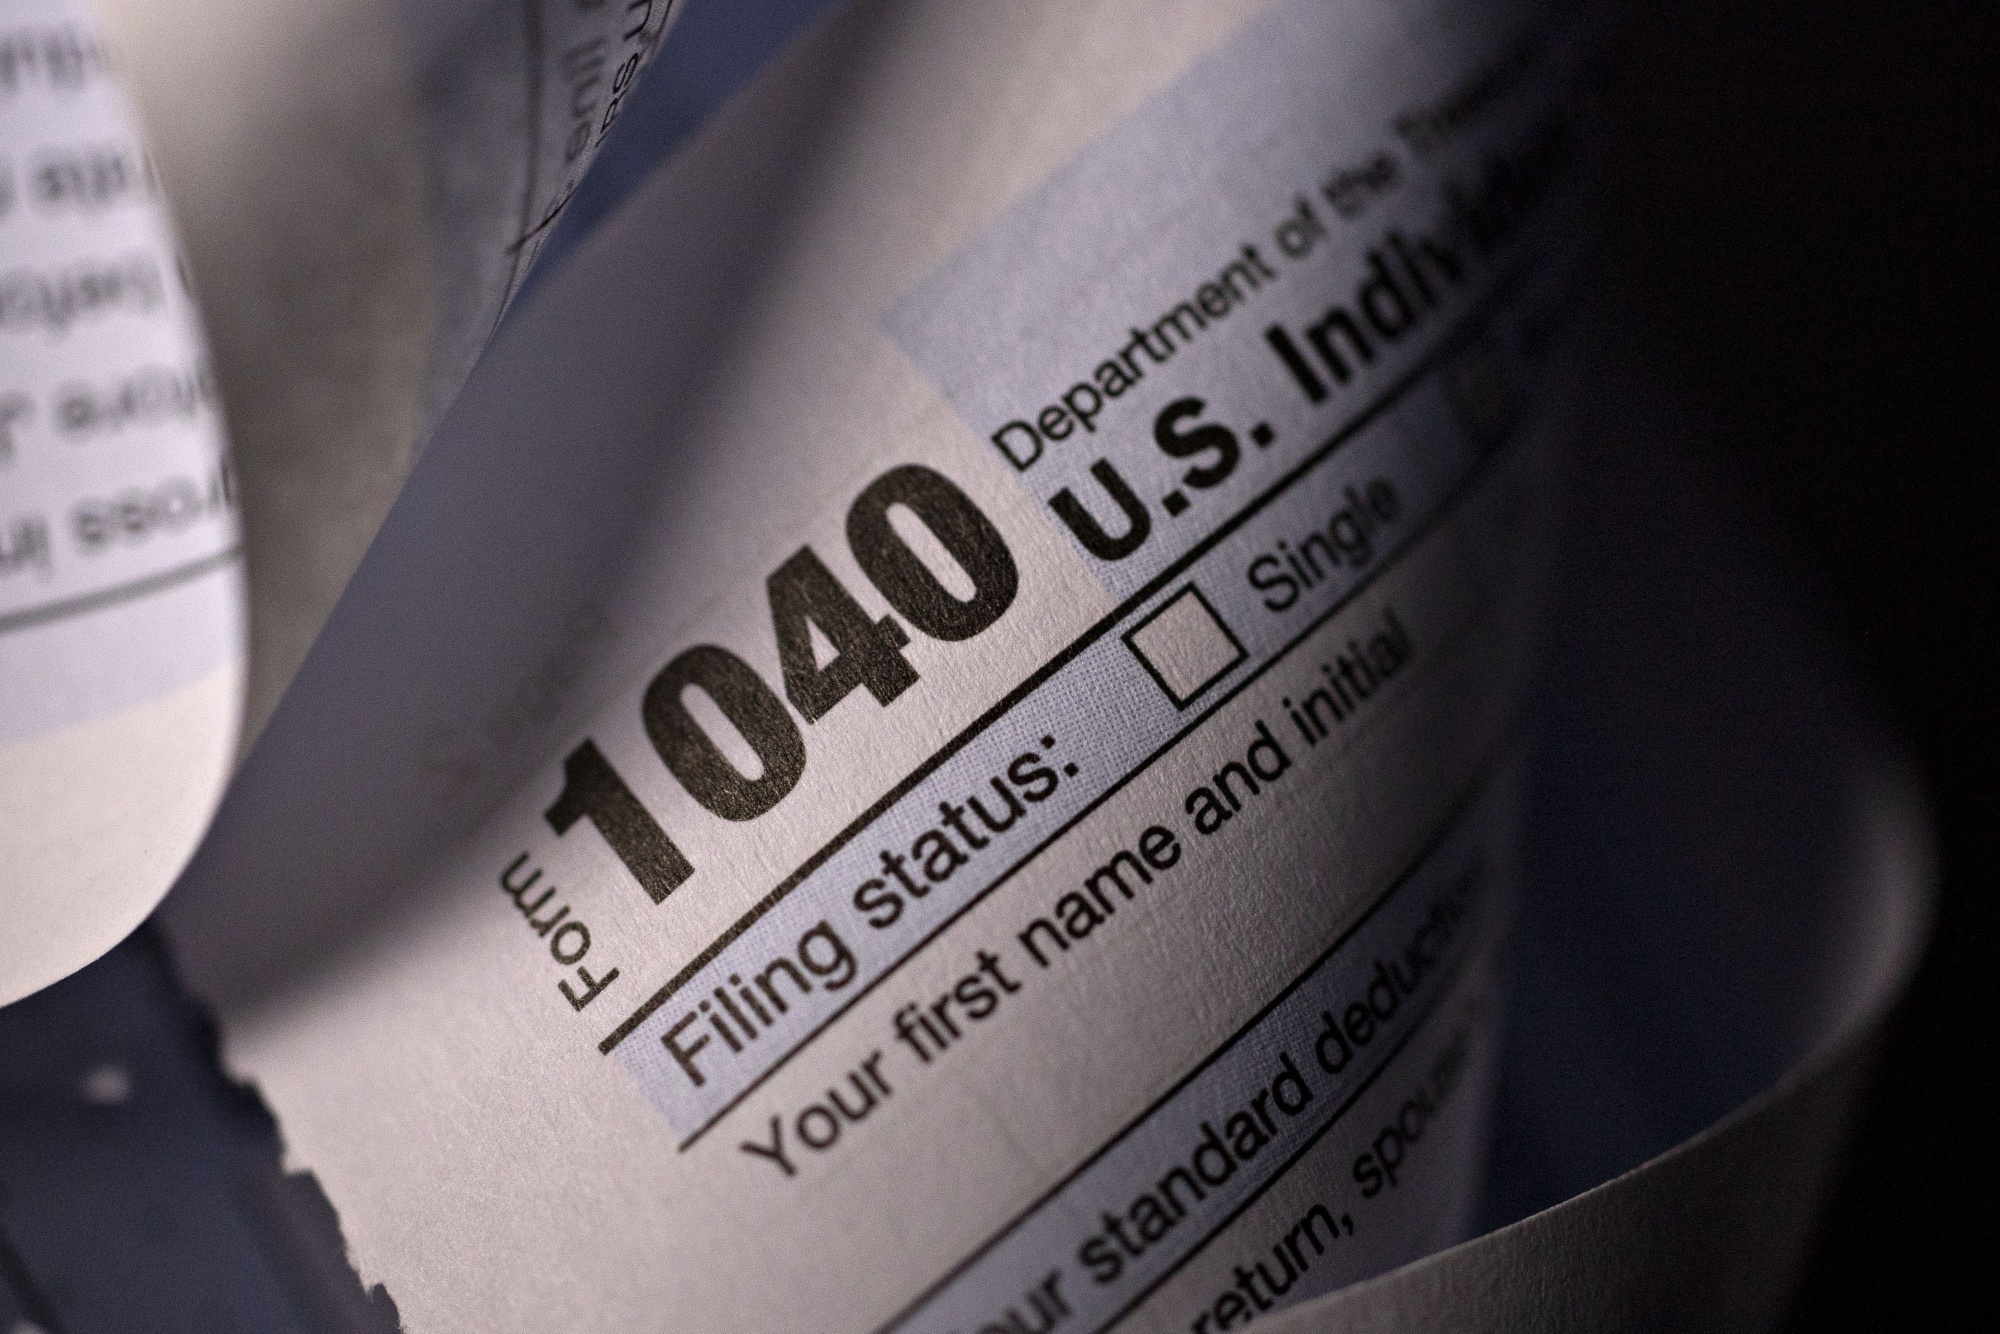 Tax Day could be more of a relief in the future.